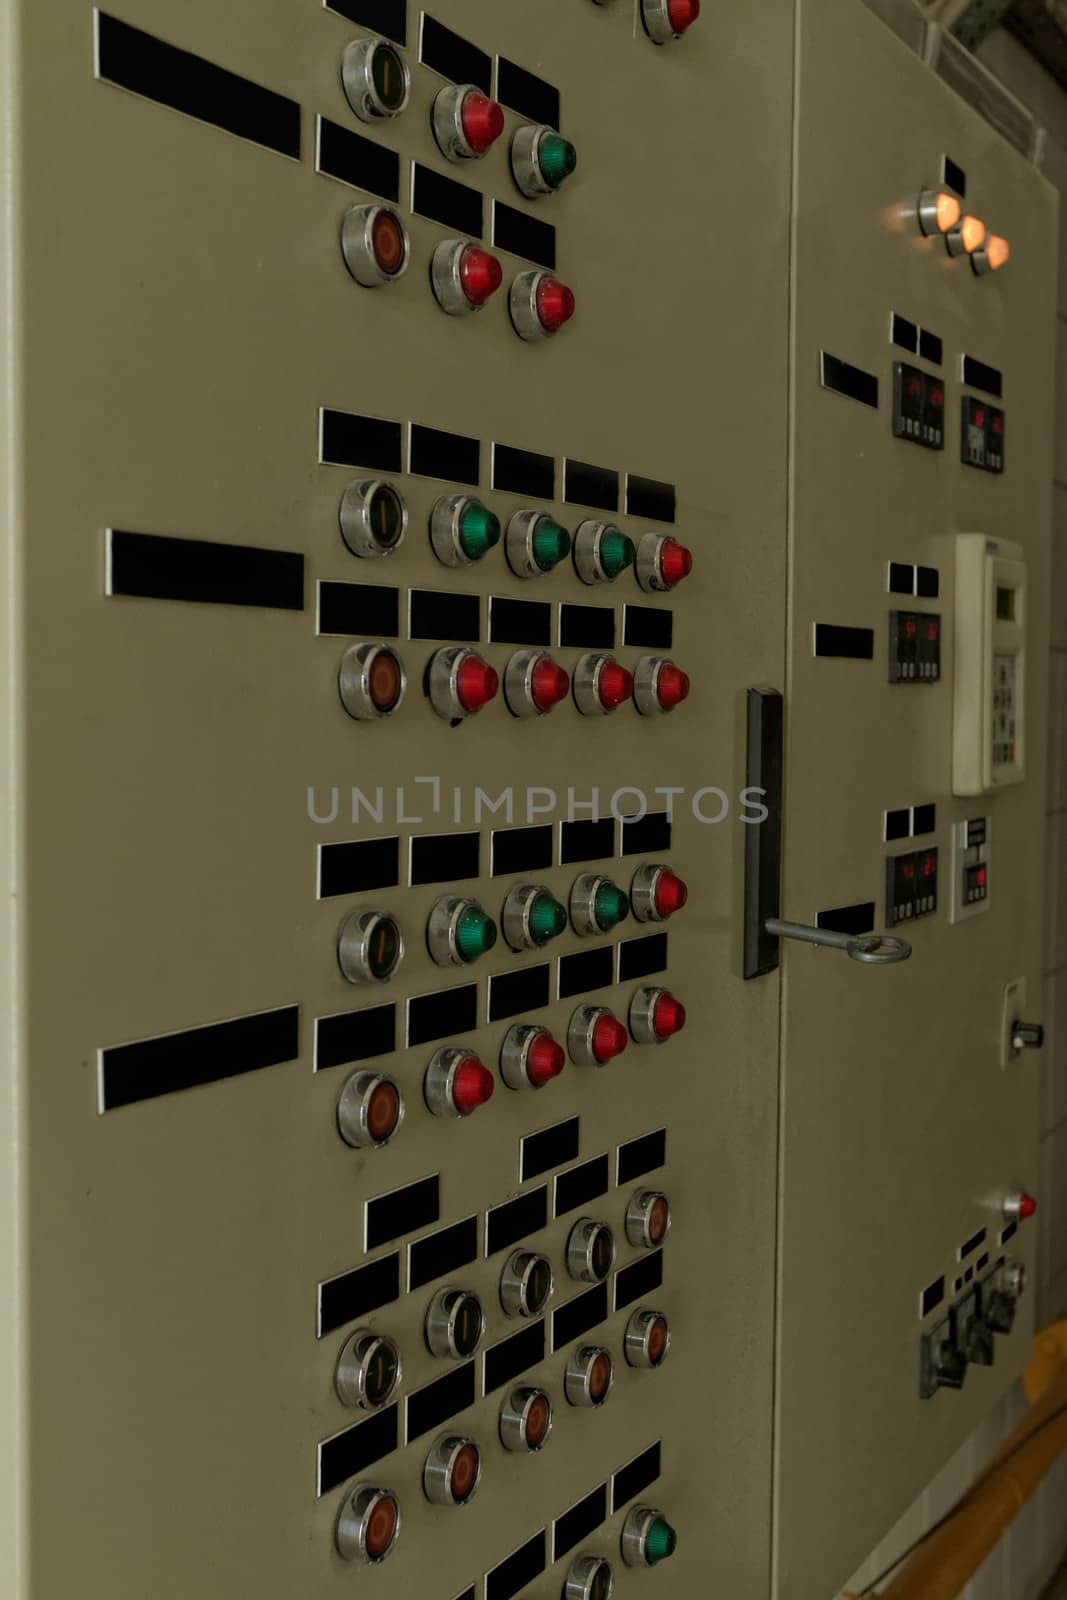 control Panel with red and green lamps and buttons